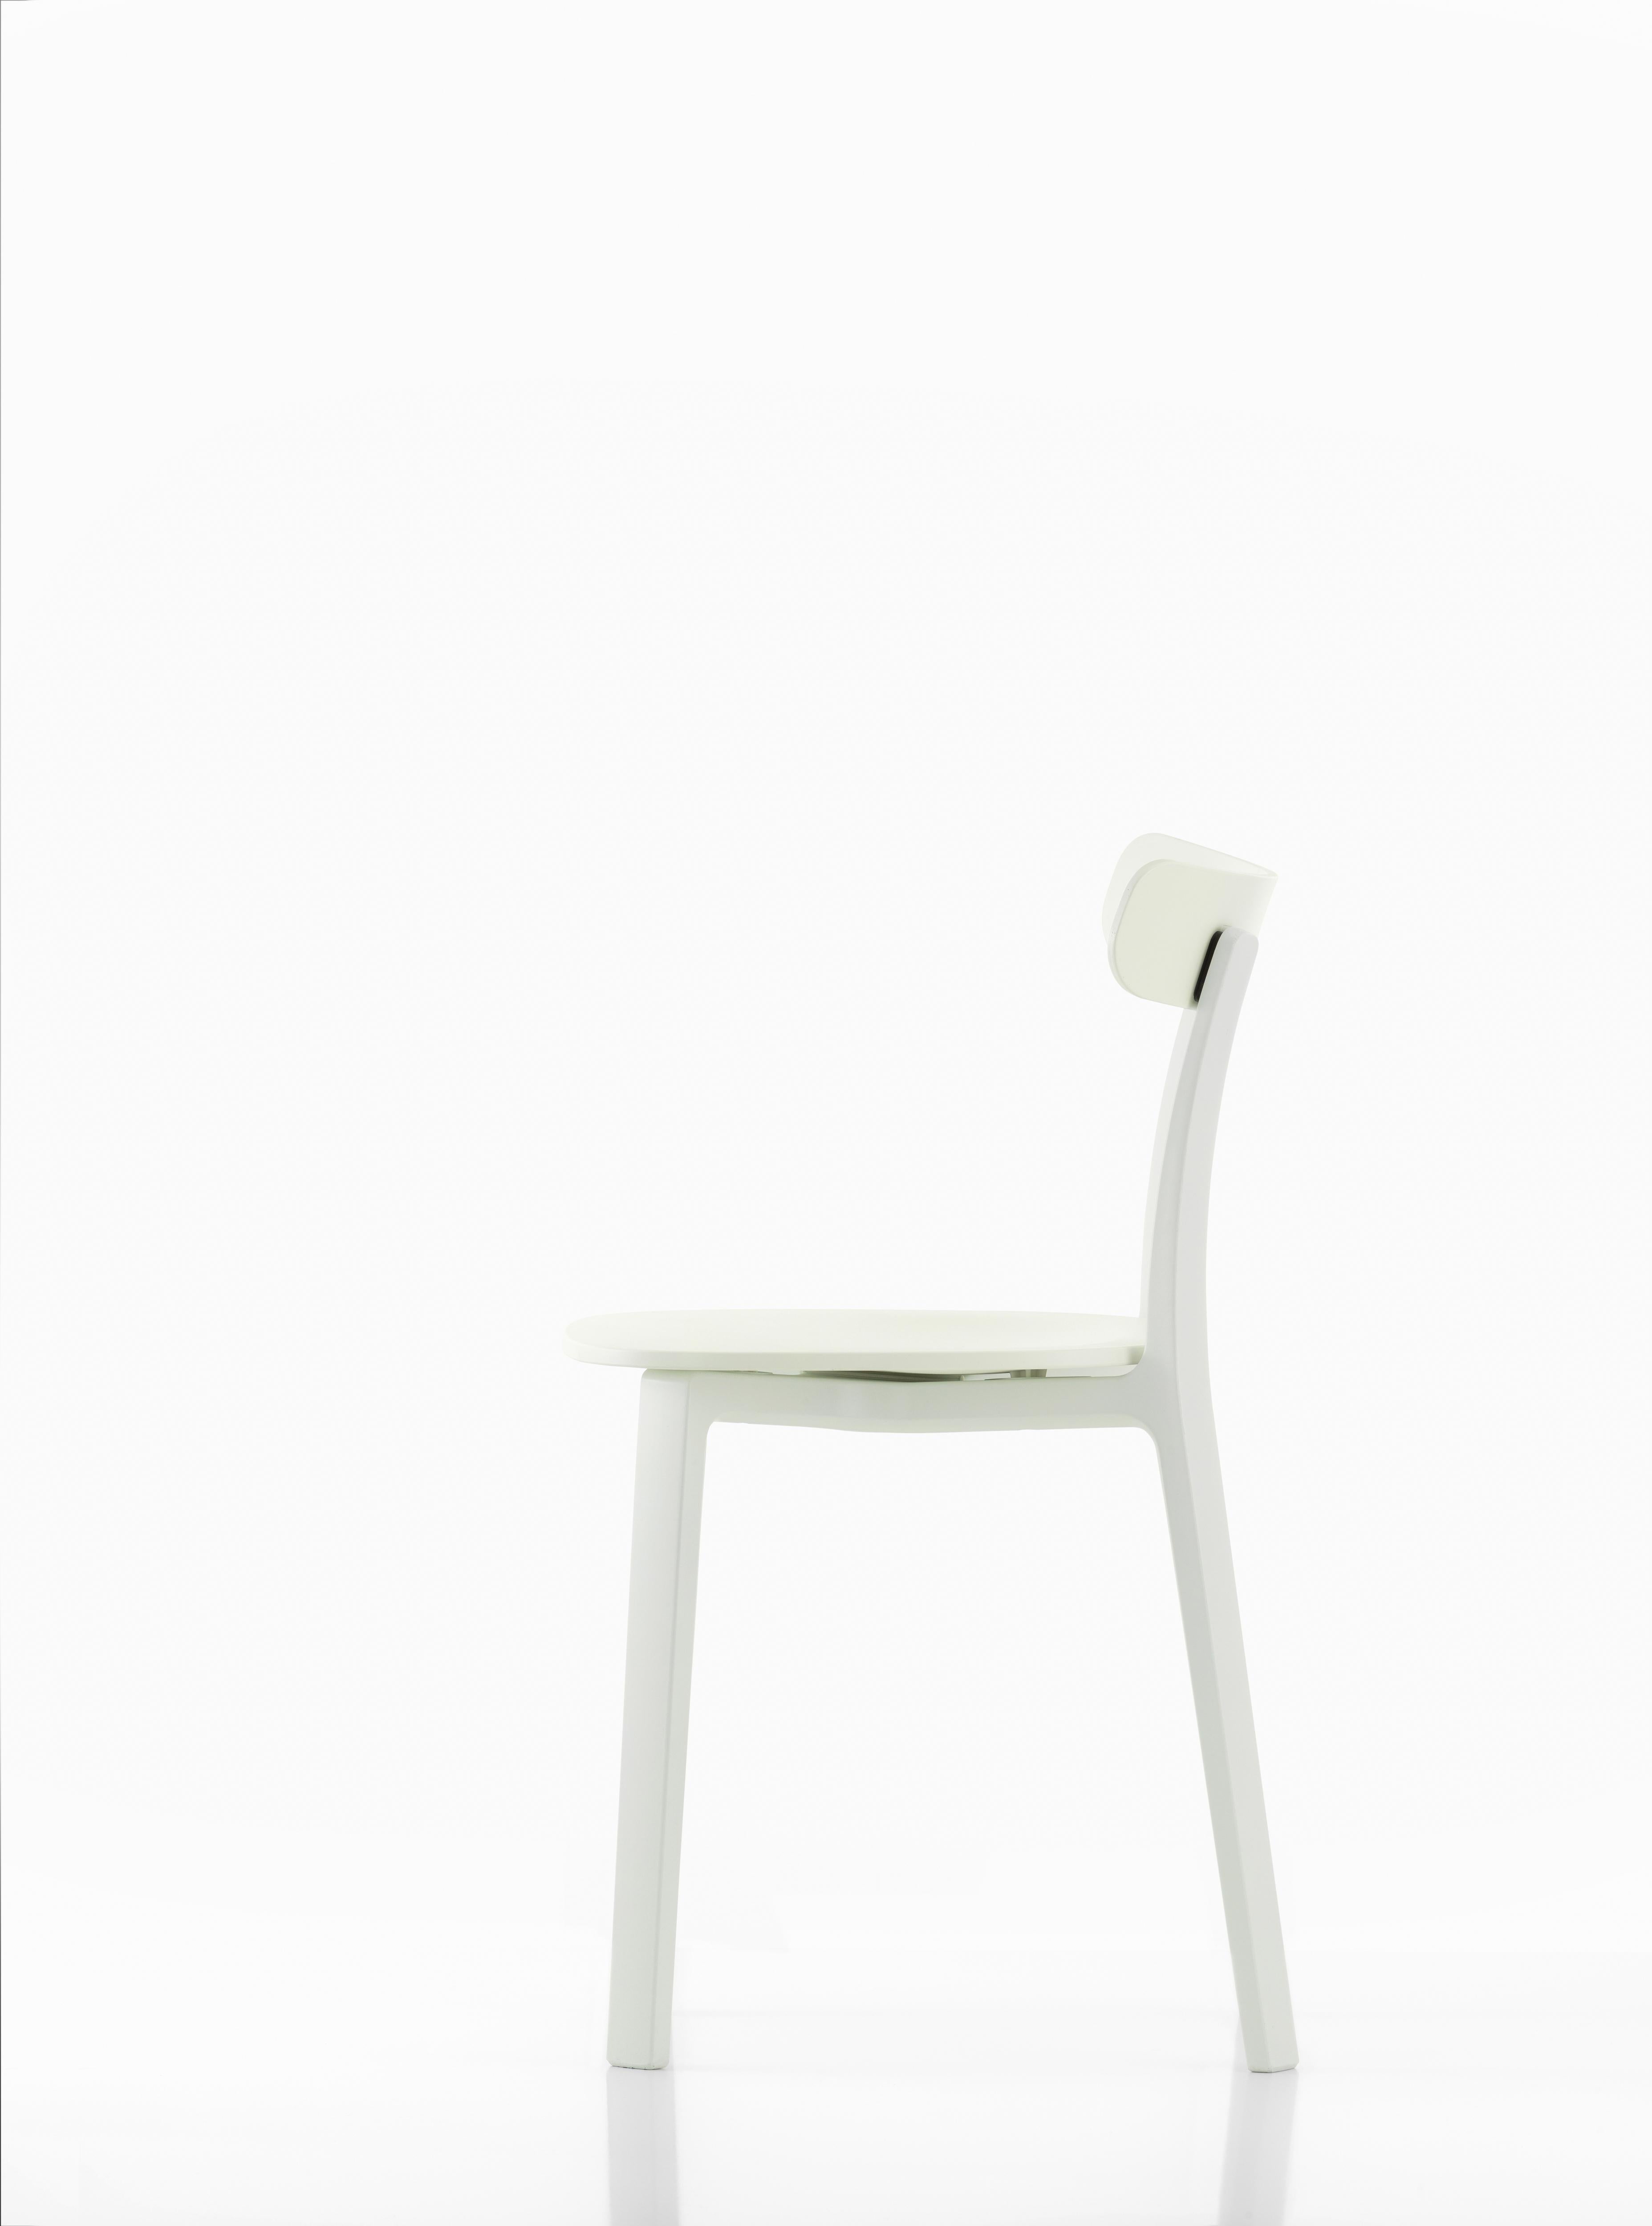 Modern Vitra All Plastic Chair in White Two-Tone by Jasper Morrison For Sale